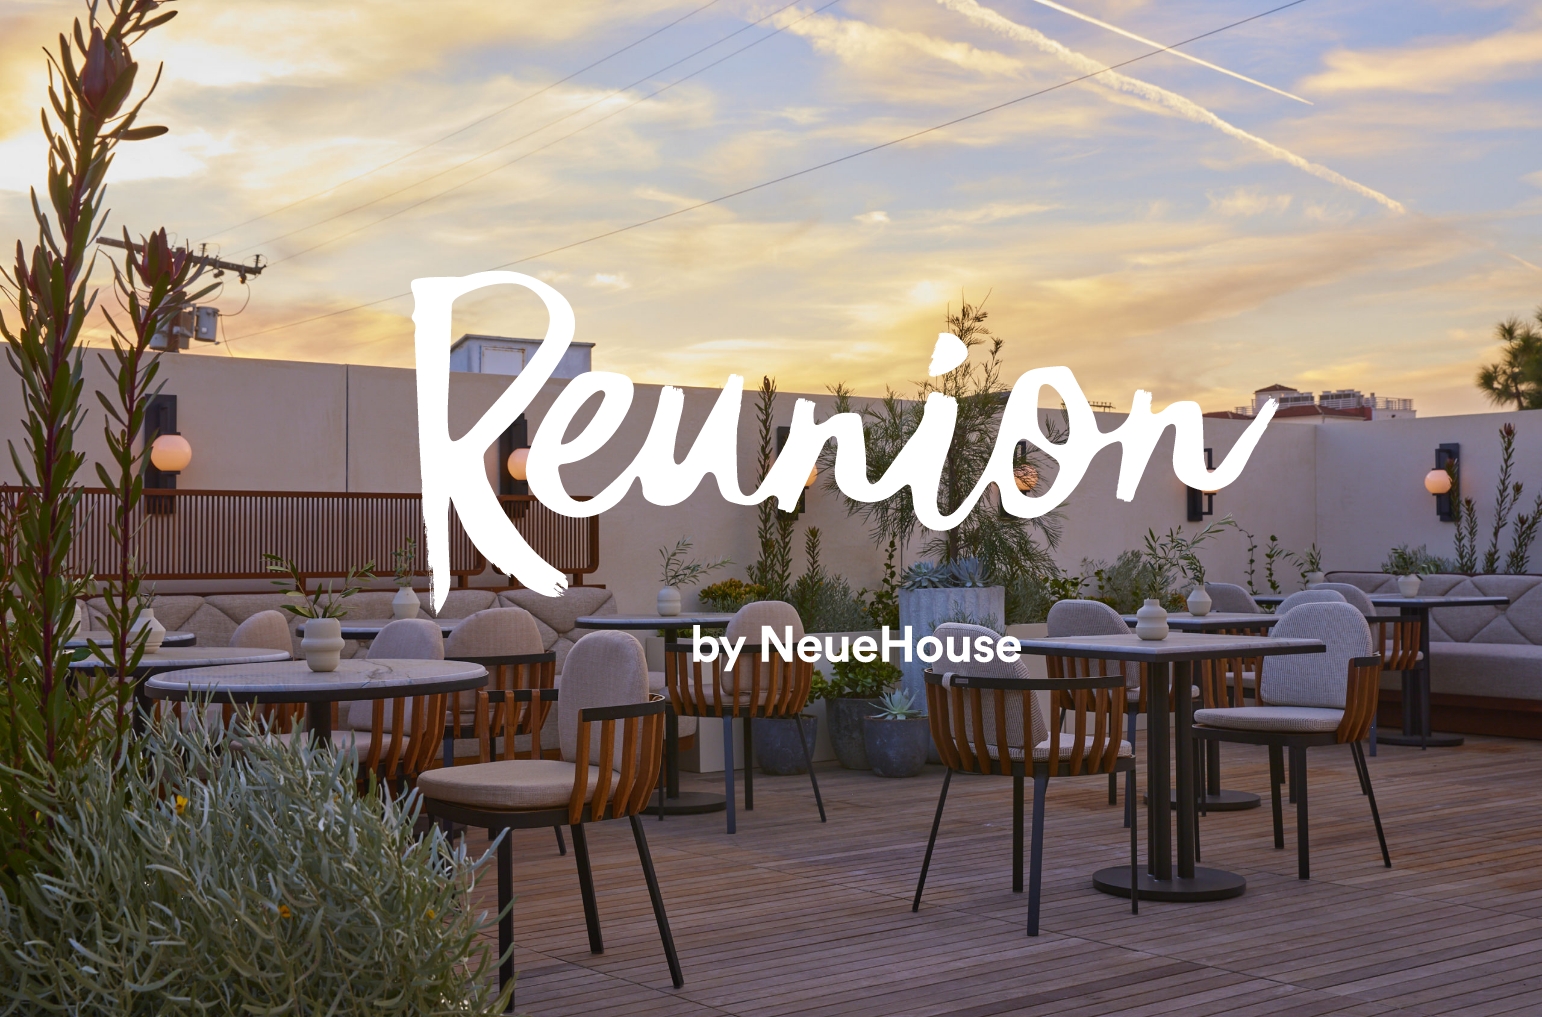 Reunion by NeueHouse - Our Los Angeles Italian Restaurant with locations in Hollywood & Venice Beach